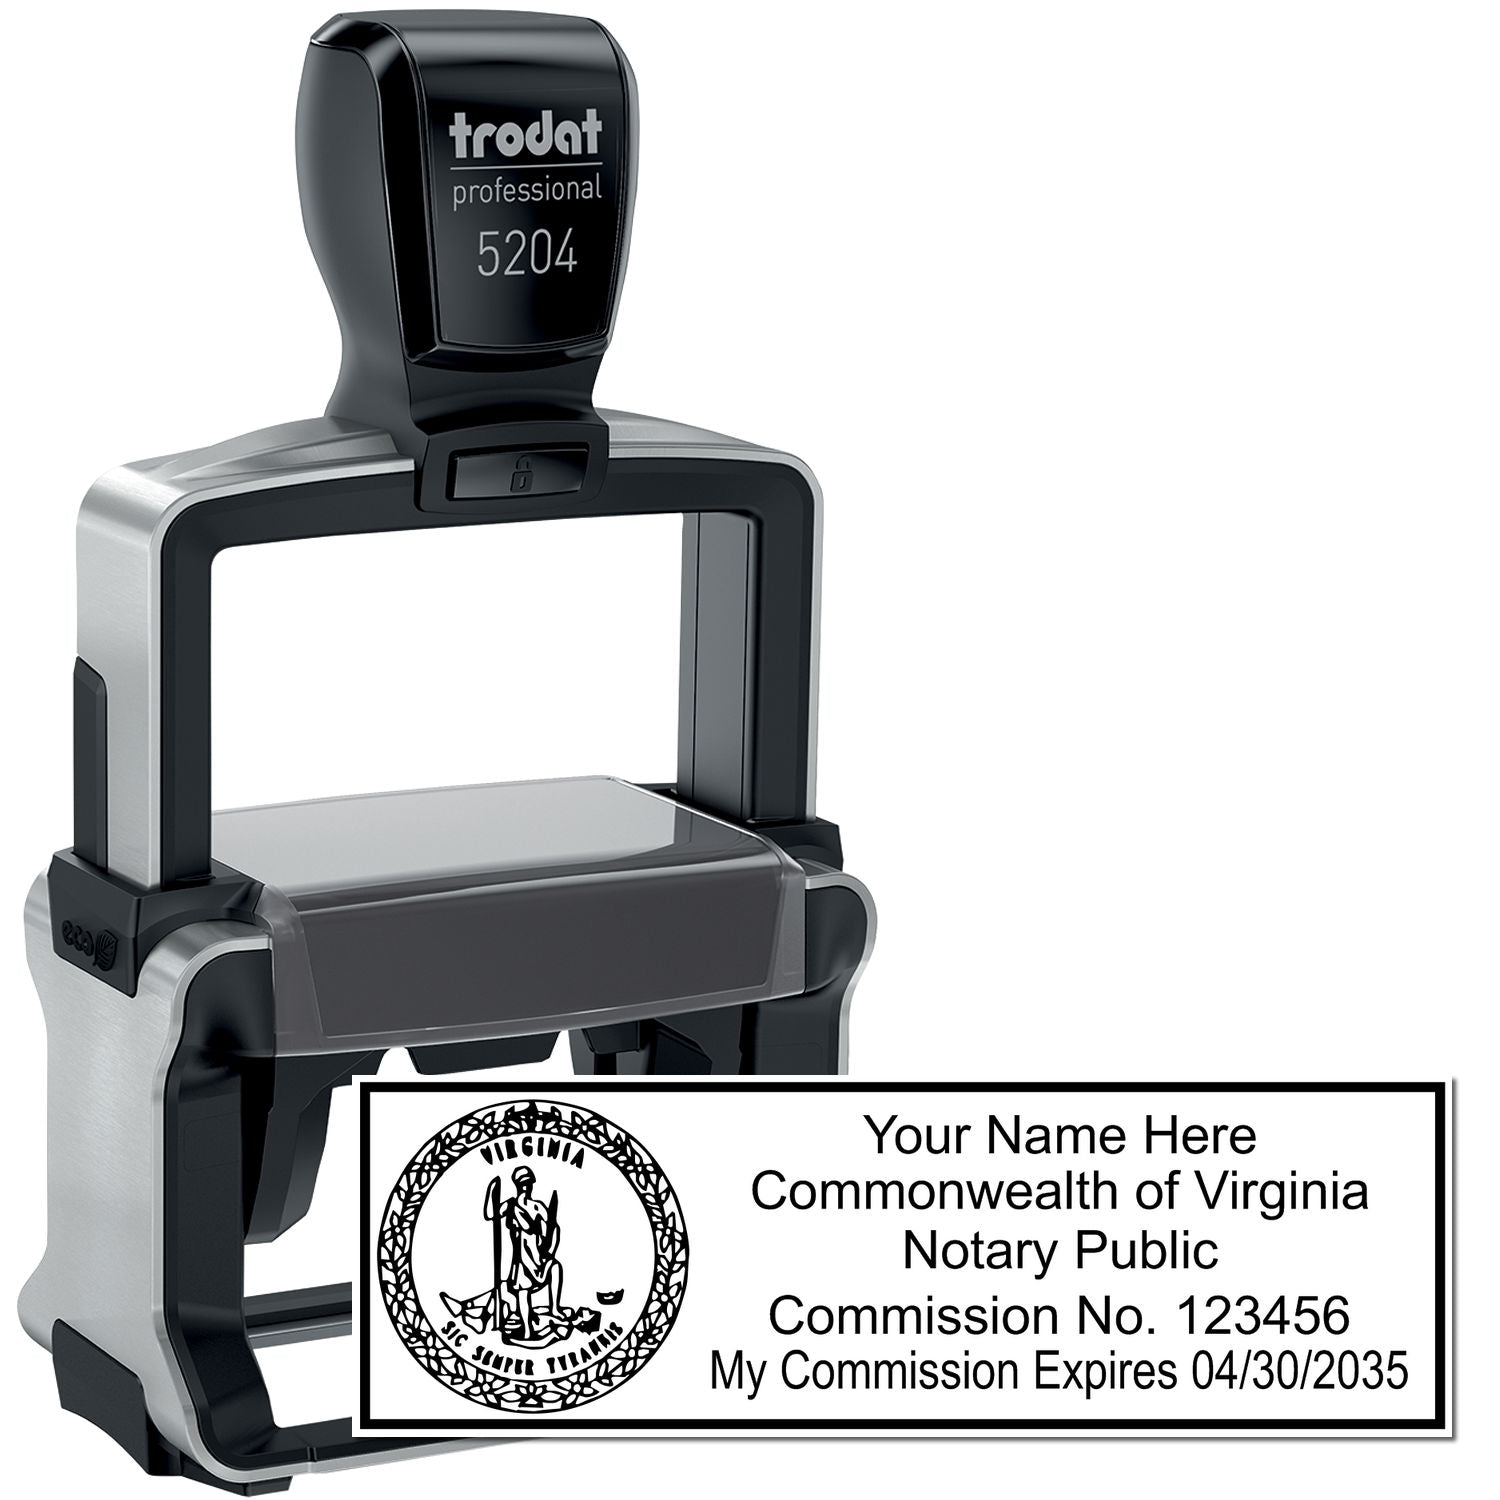 The main image for the Heavy-Duty Virginia Rectangular Notary Stamp depicting a sample of the imprint and electronic files